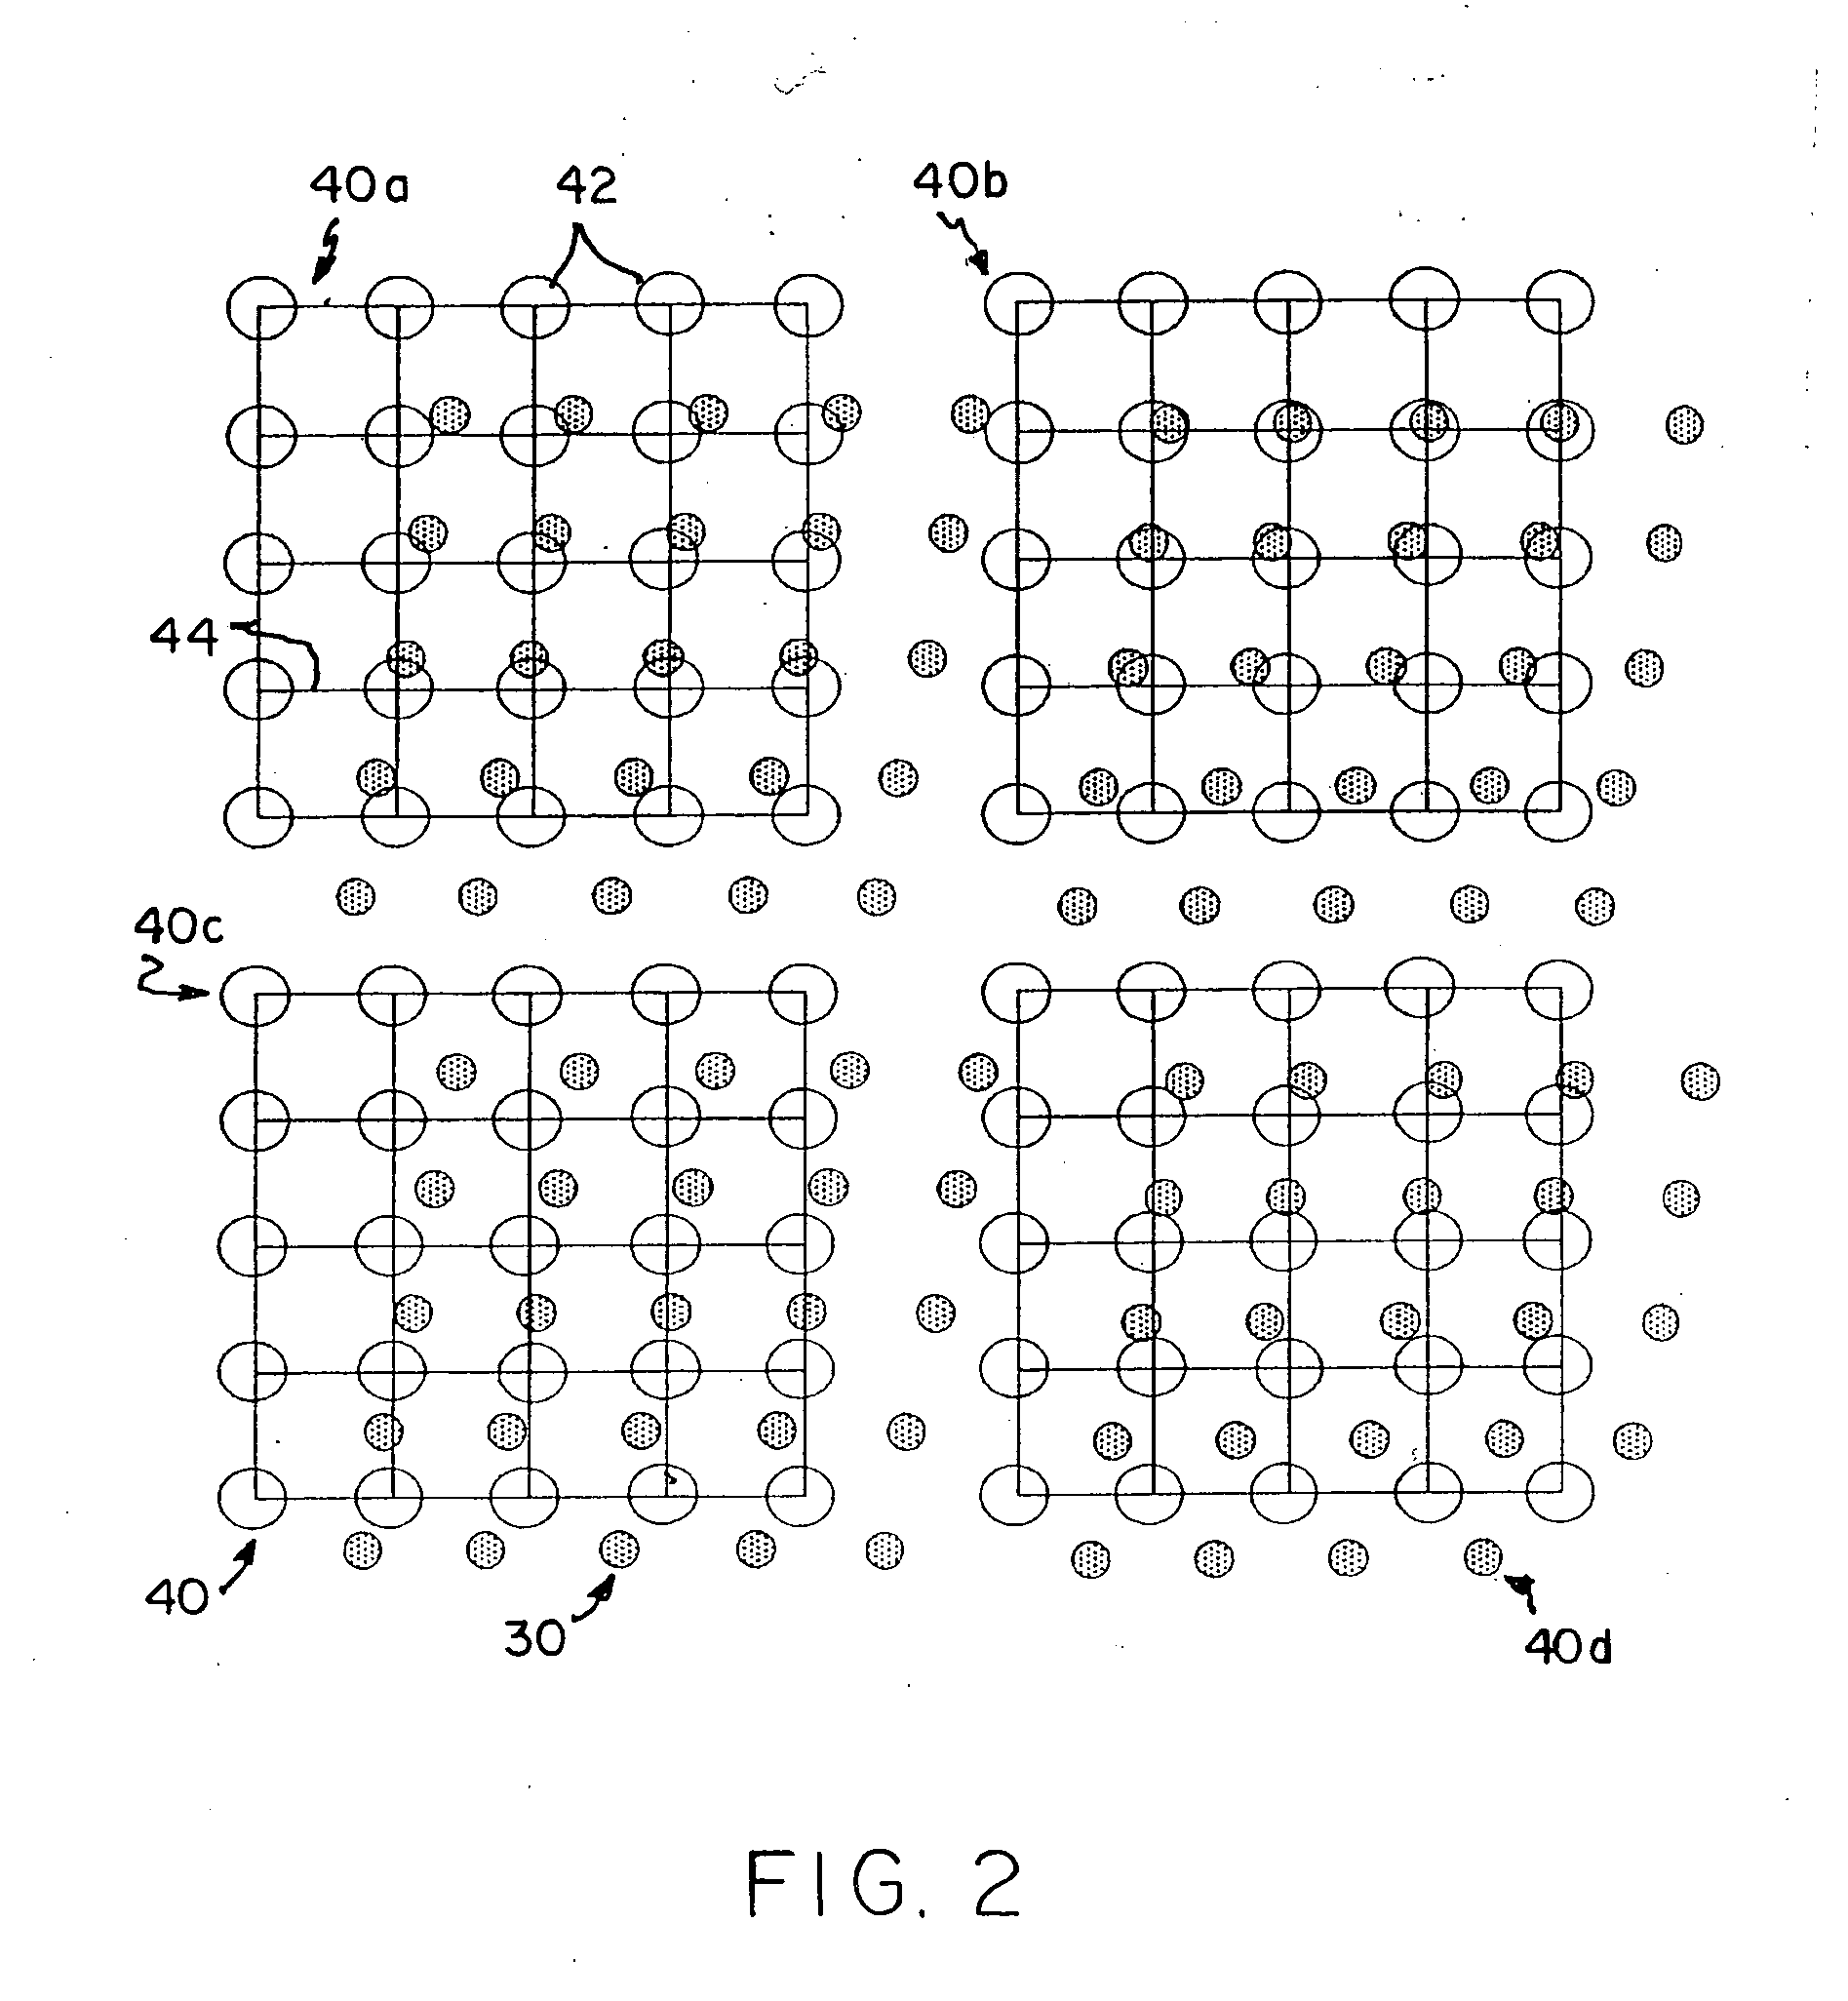 Method and apparatus for segmenting a microarray image